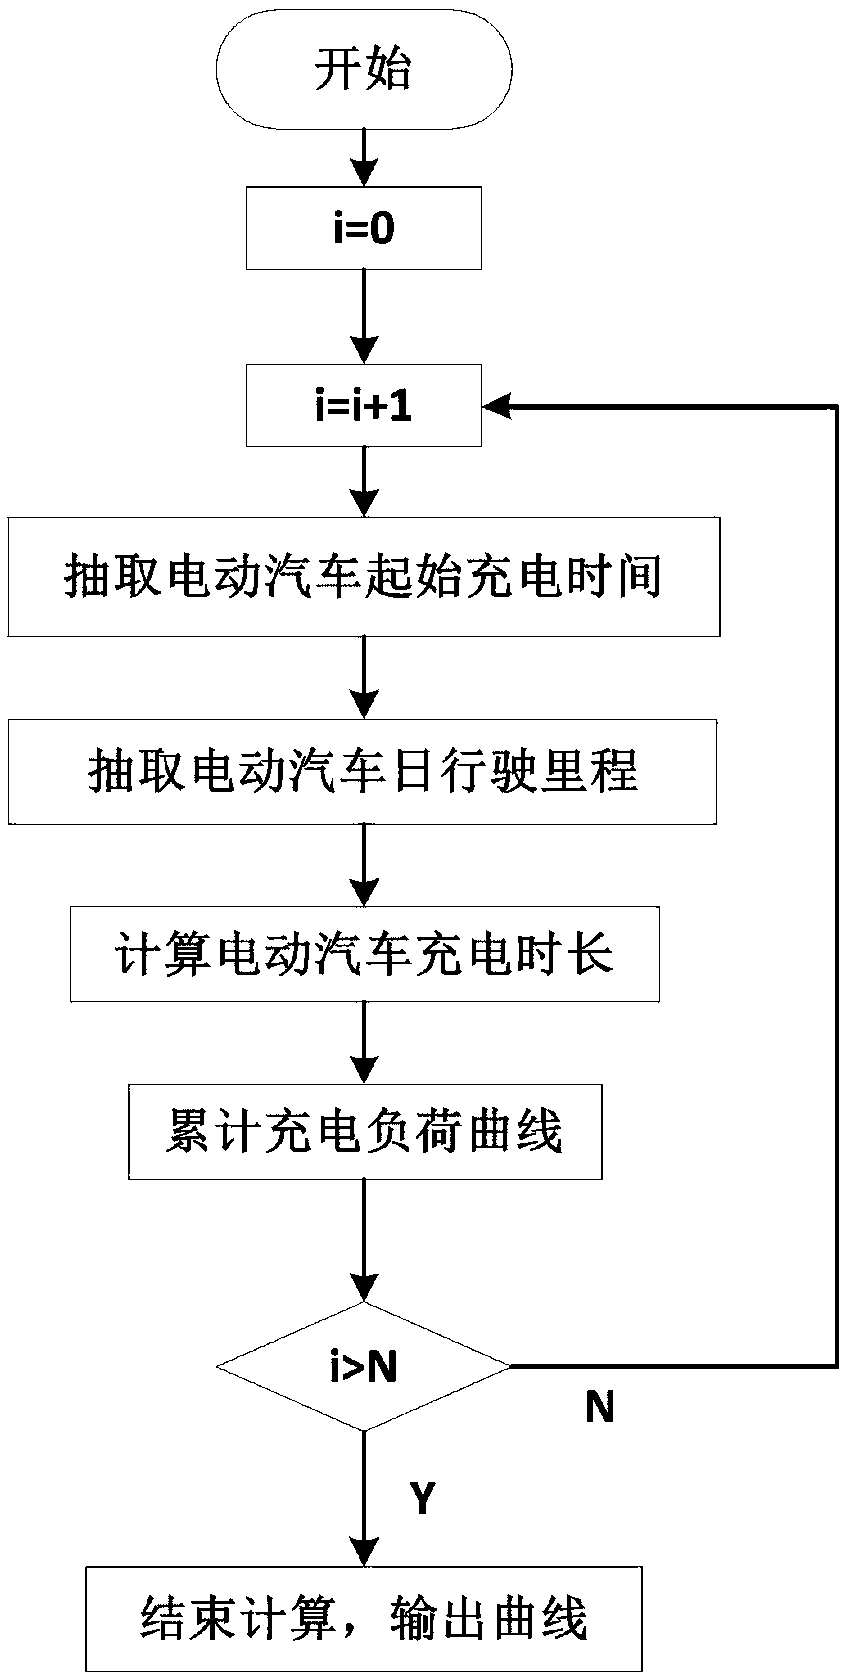 Electric vehicle orderly charging control method